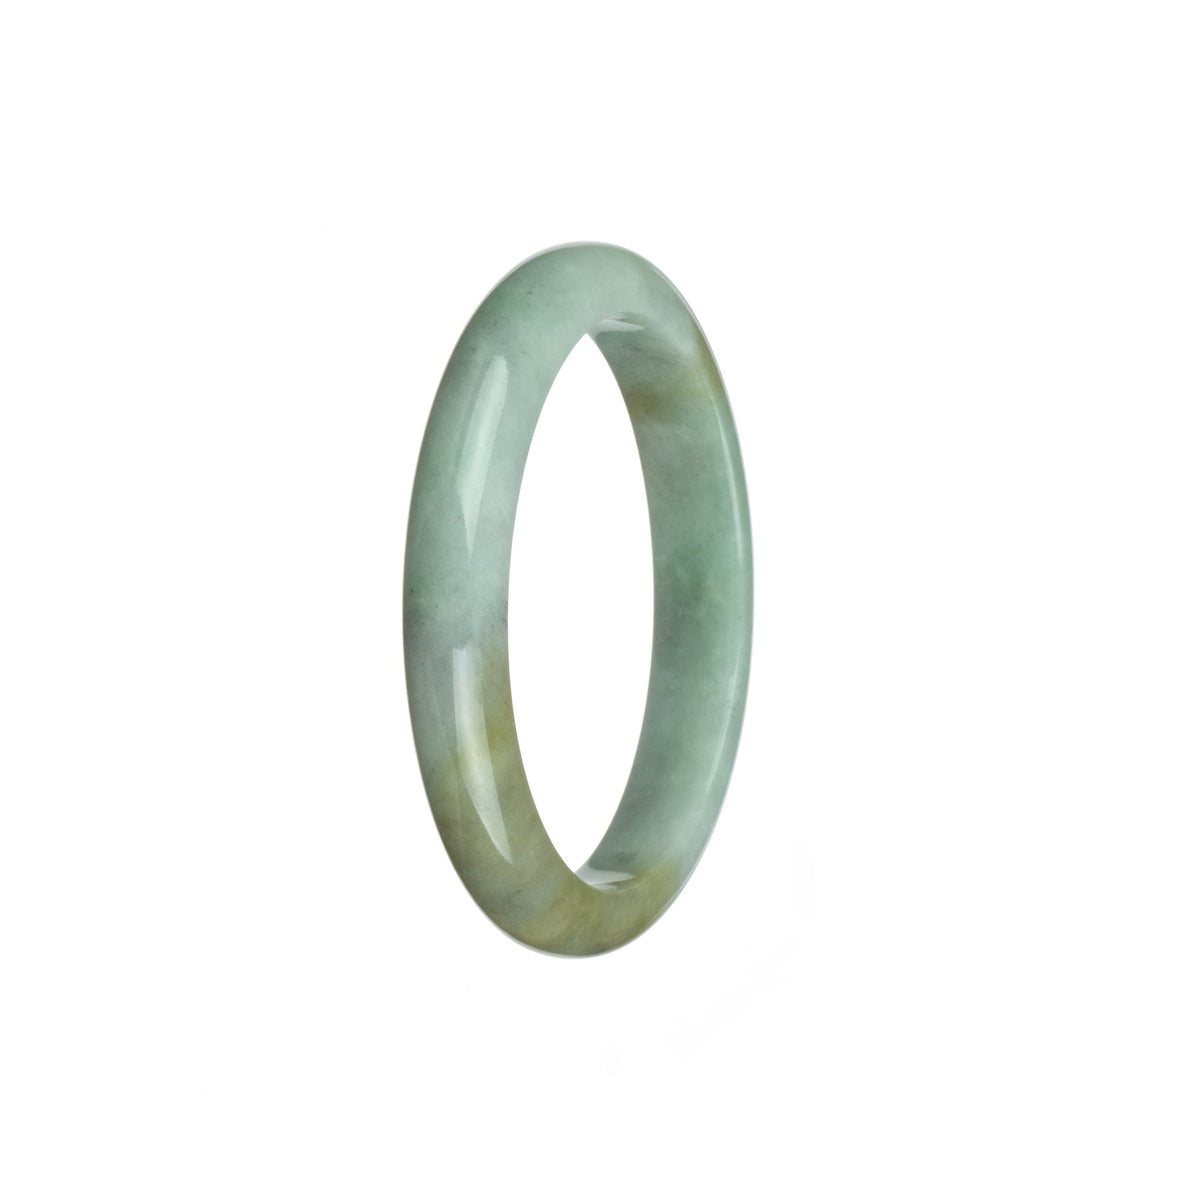 A stunning certified natural white and light brown jade bangle featuring a 53mm semi-round shape. Perfect for adding elegance to any outfit.